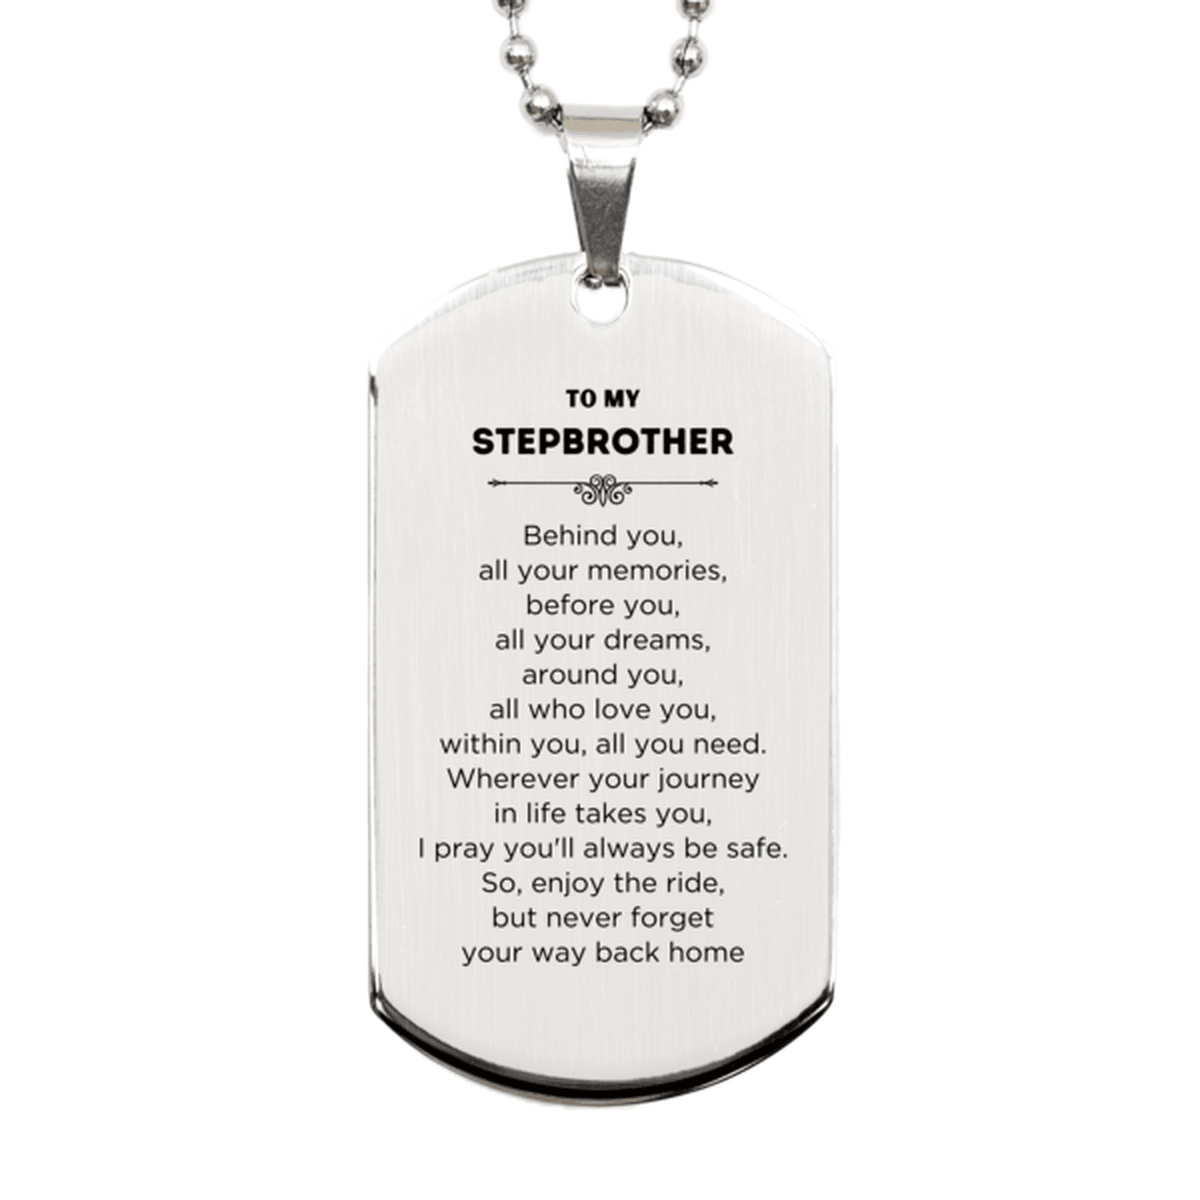 To My Stepbrother Gifts, Inspirational Stepbrother Silver Dog Tag, Sentimental Birthday Christmas Unique Gifts For Stepbrother Behind you, all your memories, before you, all your dreams, around you, all who love you, within you, all you need